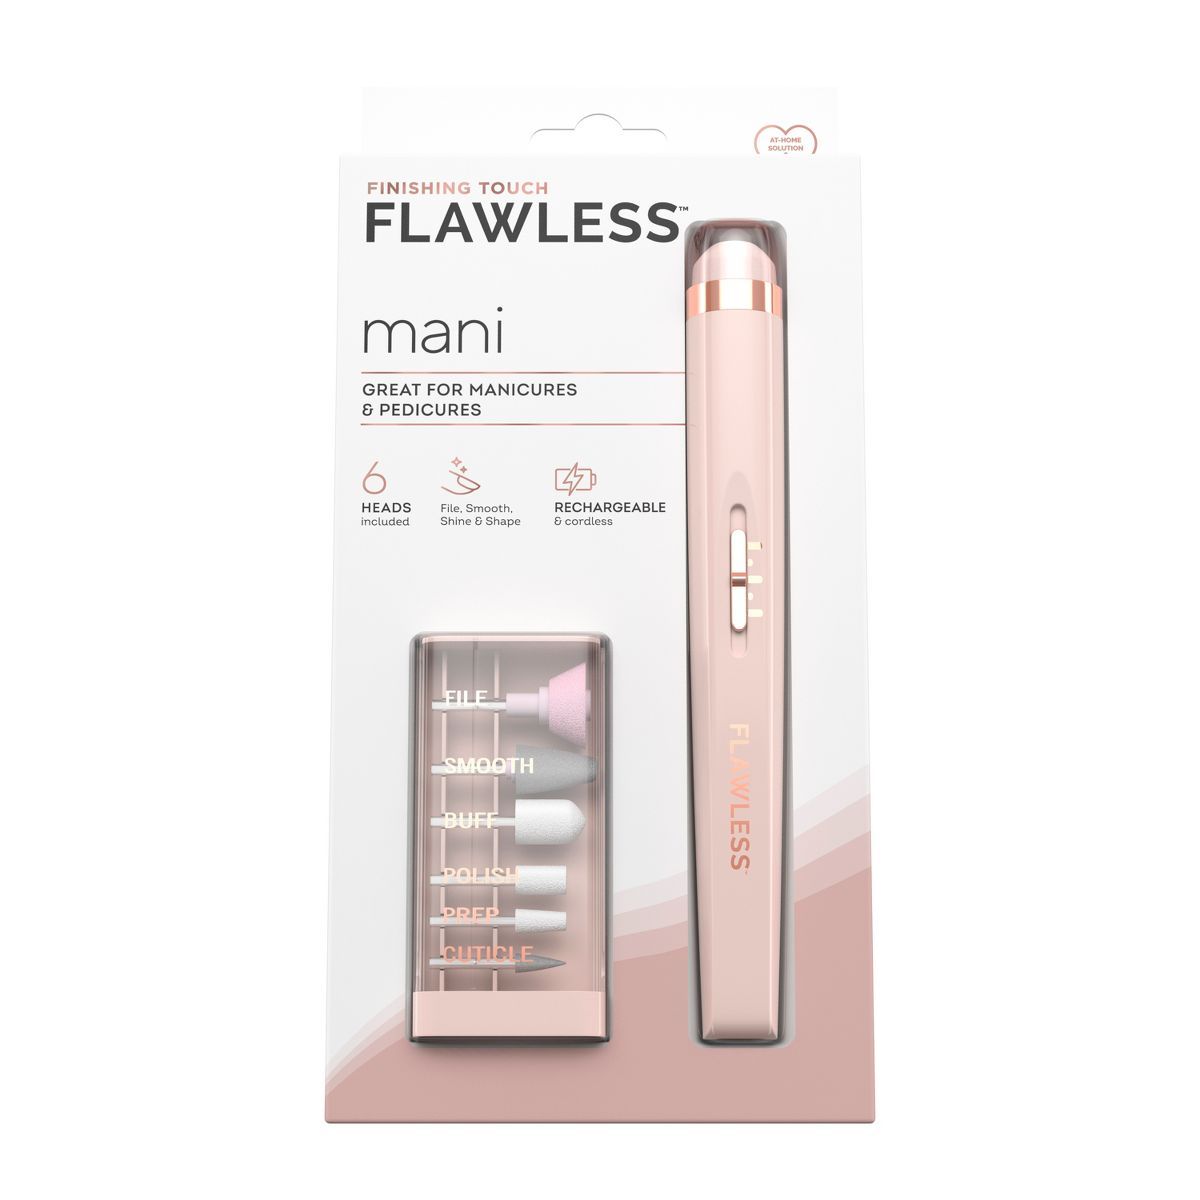 Finishing Touch Flawless Salon Nails | Target